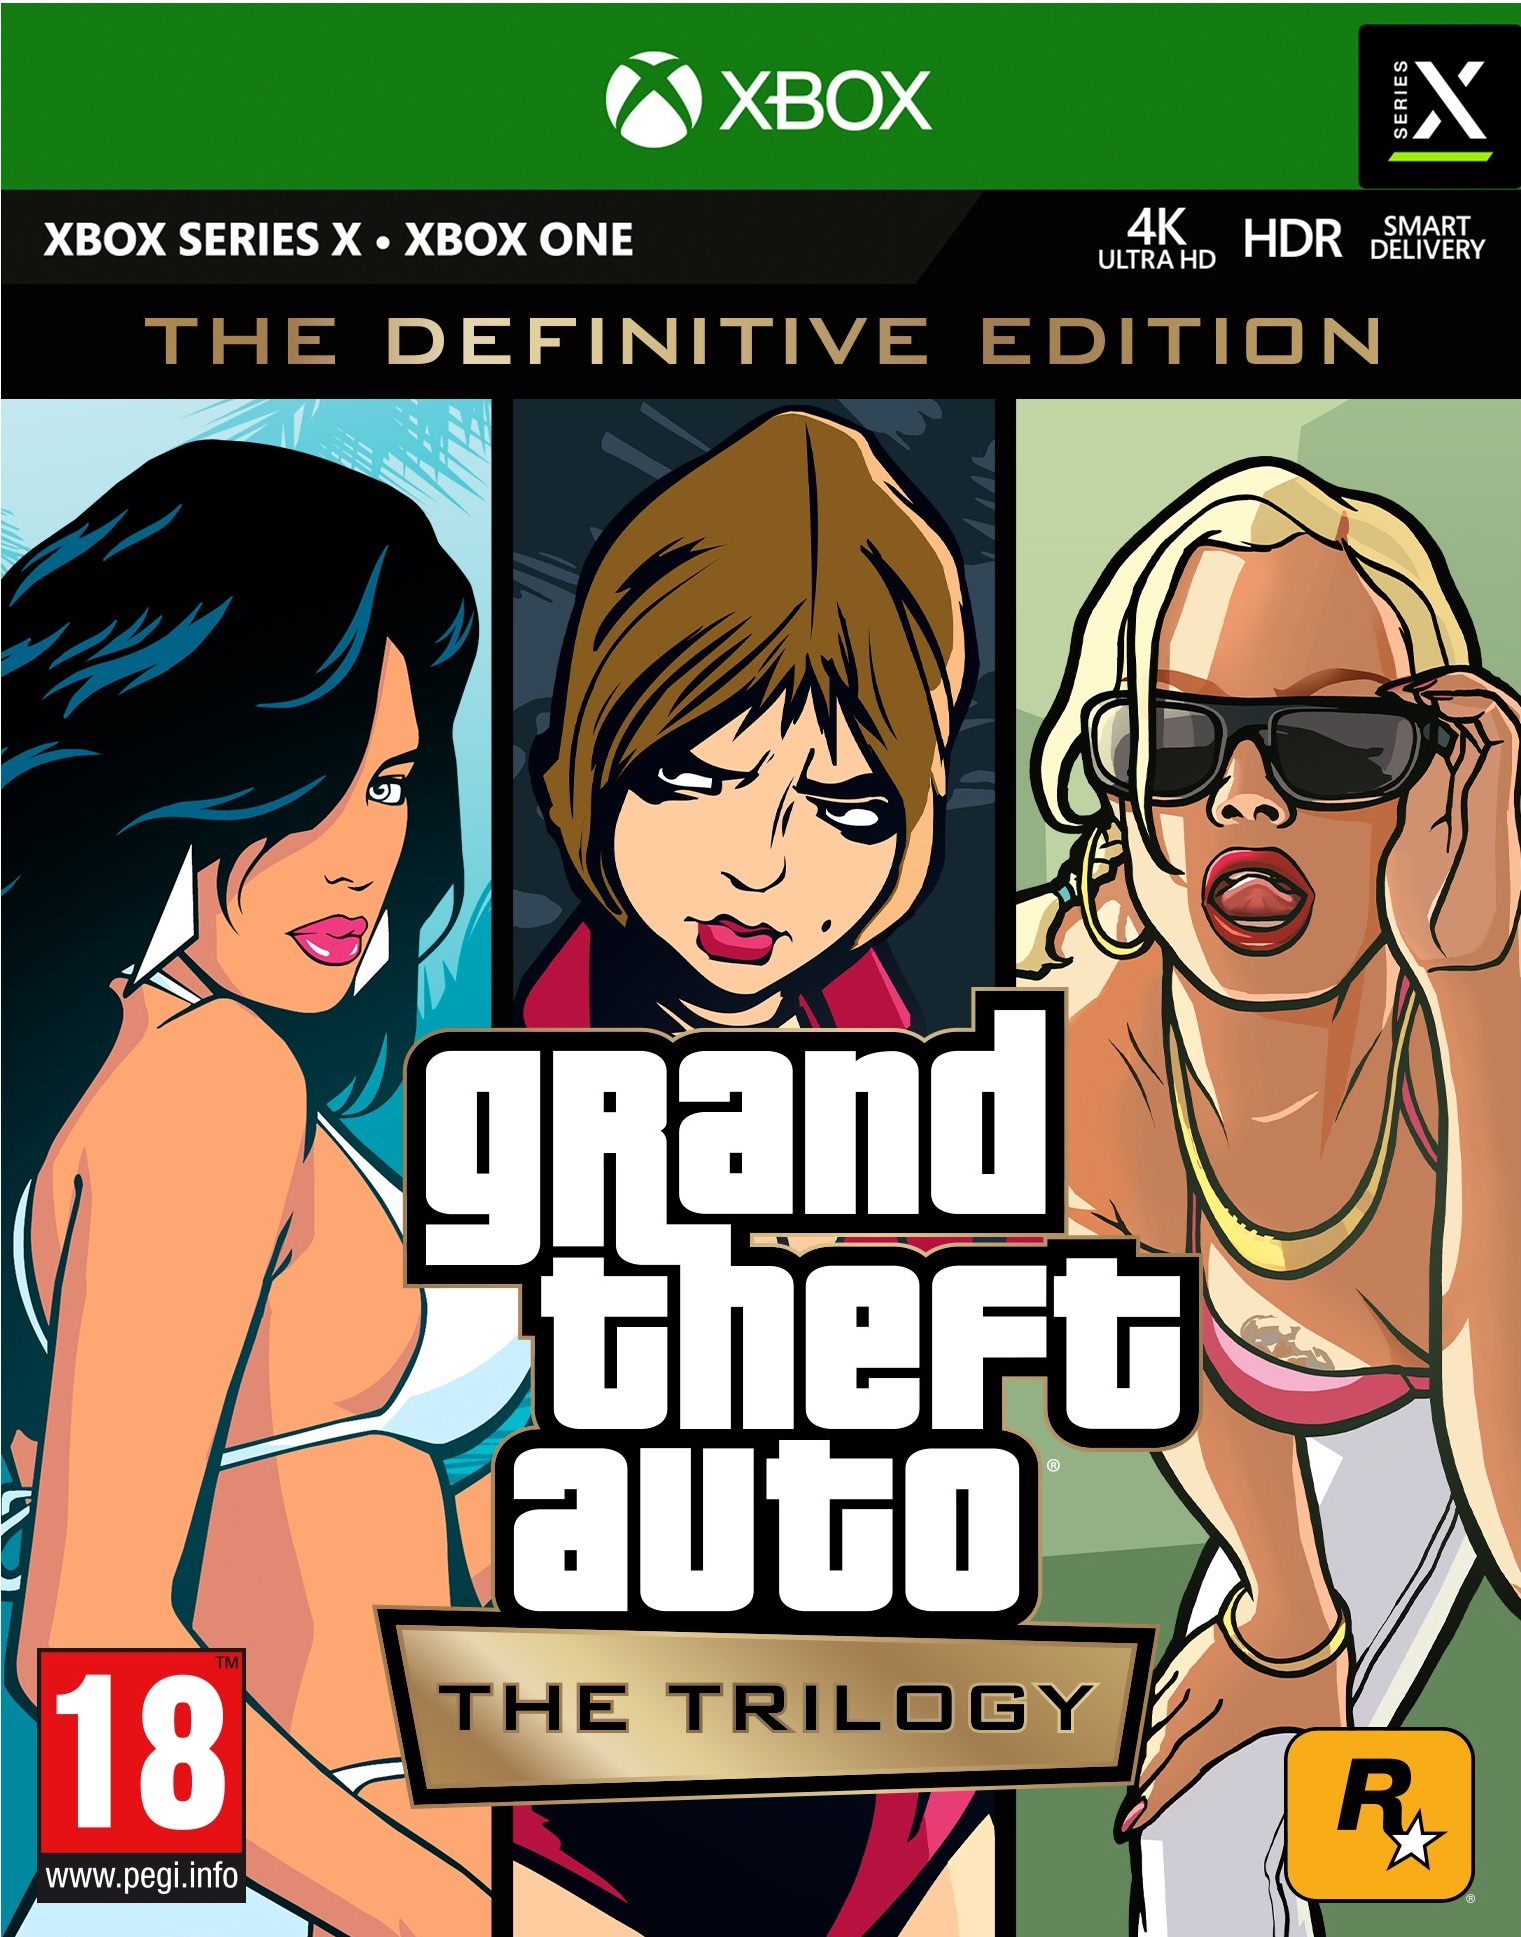 Grand Theft Auto The Trilogy - The Definitive Edition